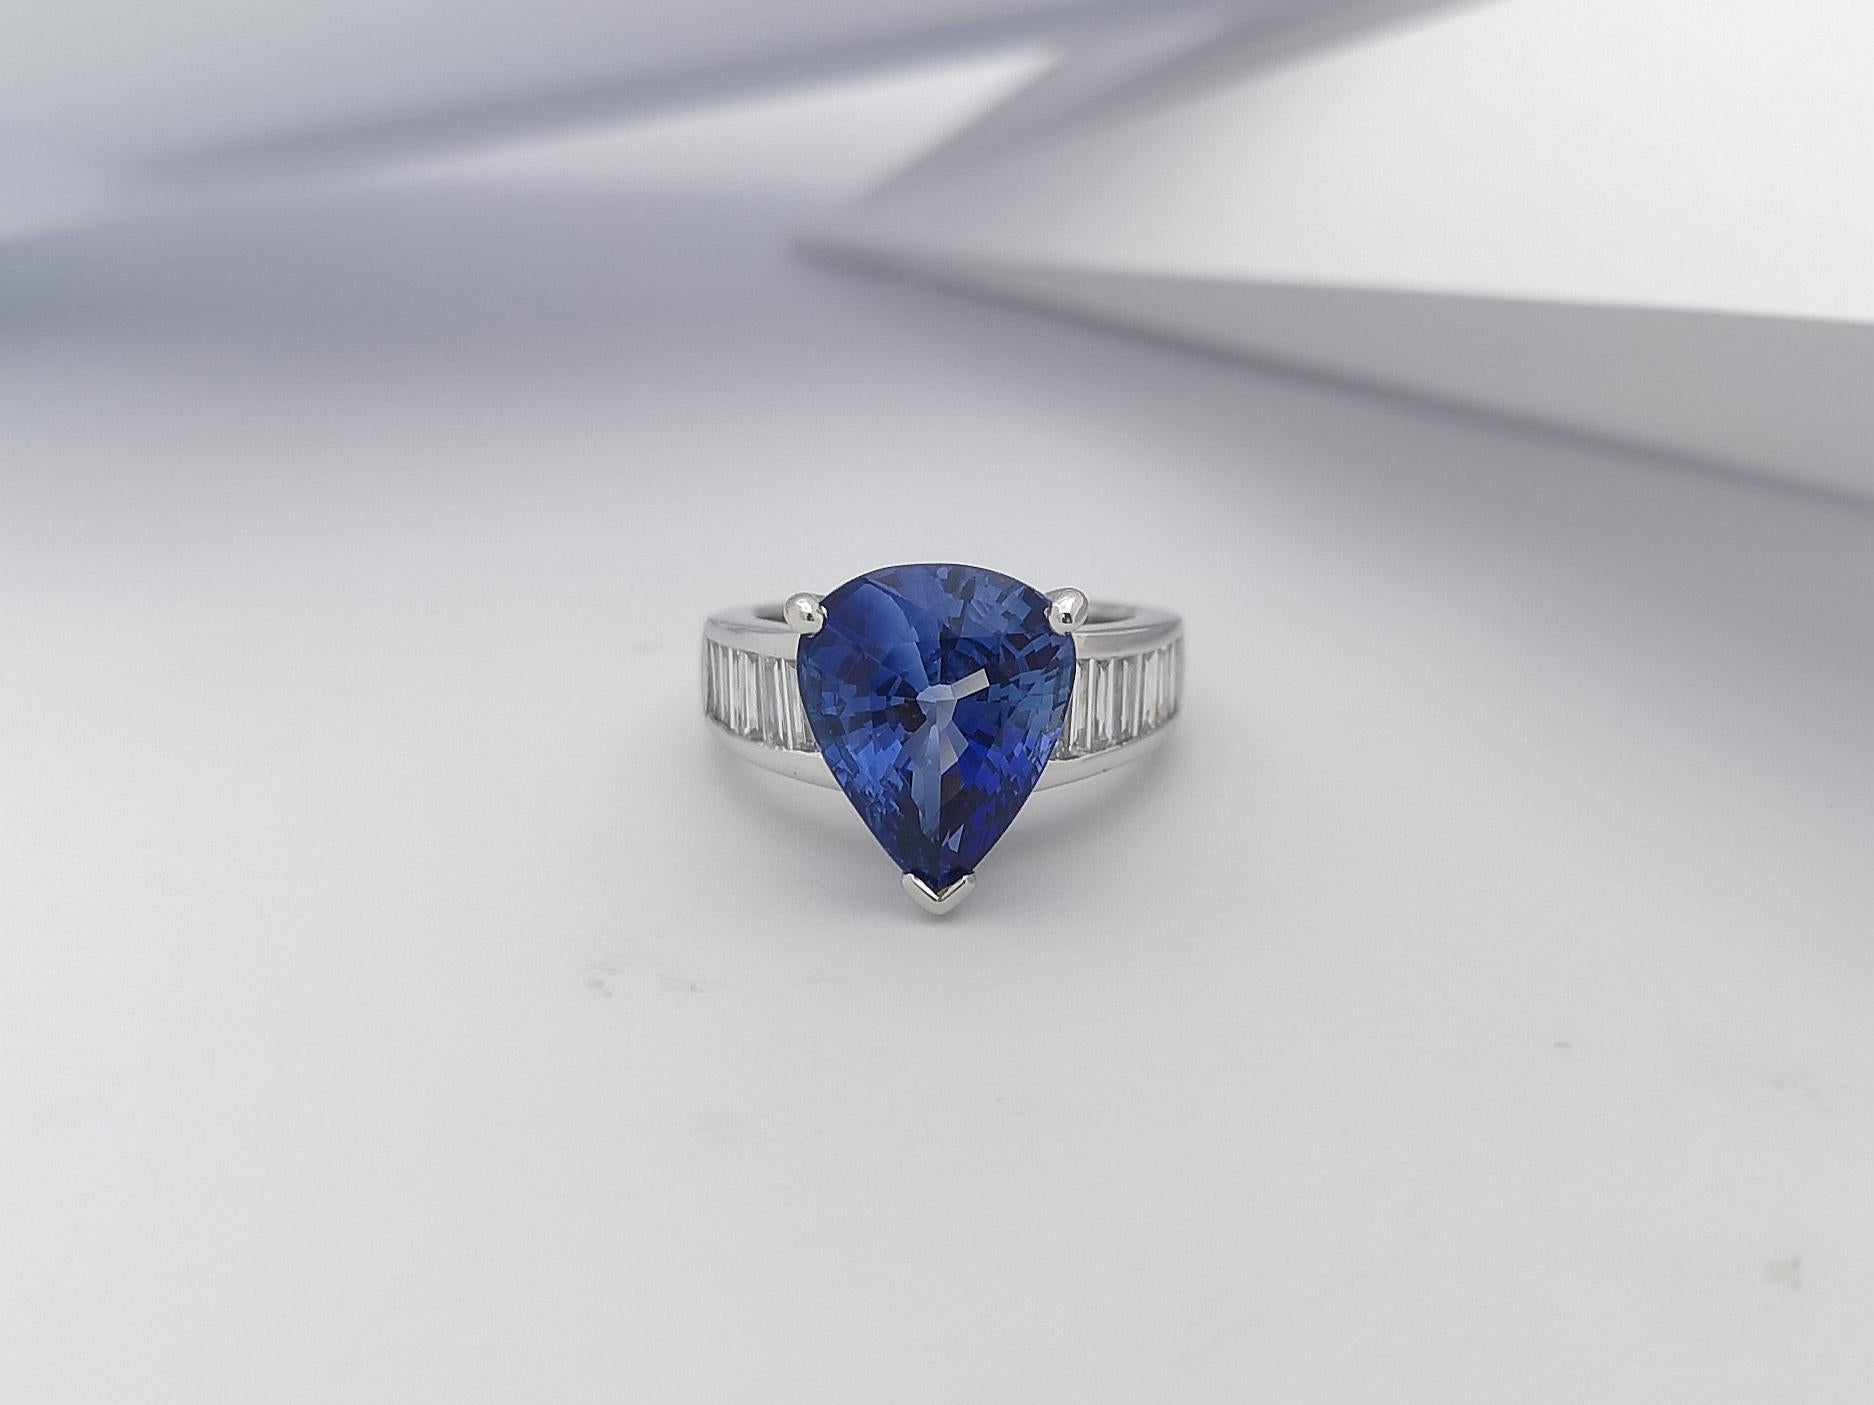 GIA Certified 7cts Ceylon Blue Sapphire with Diamond Ring Set in Platinum For Sale 1